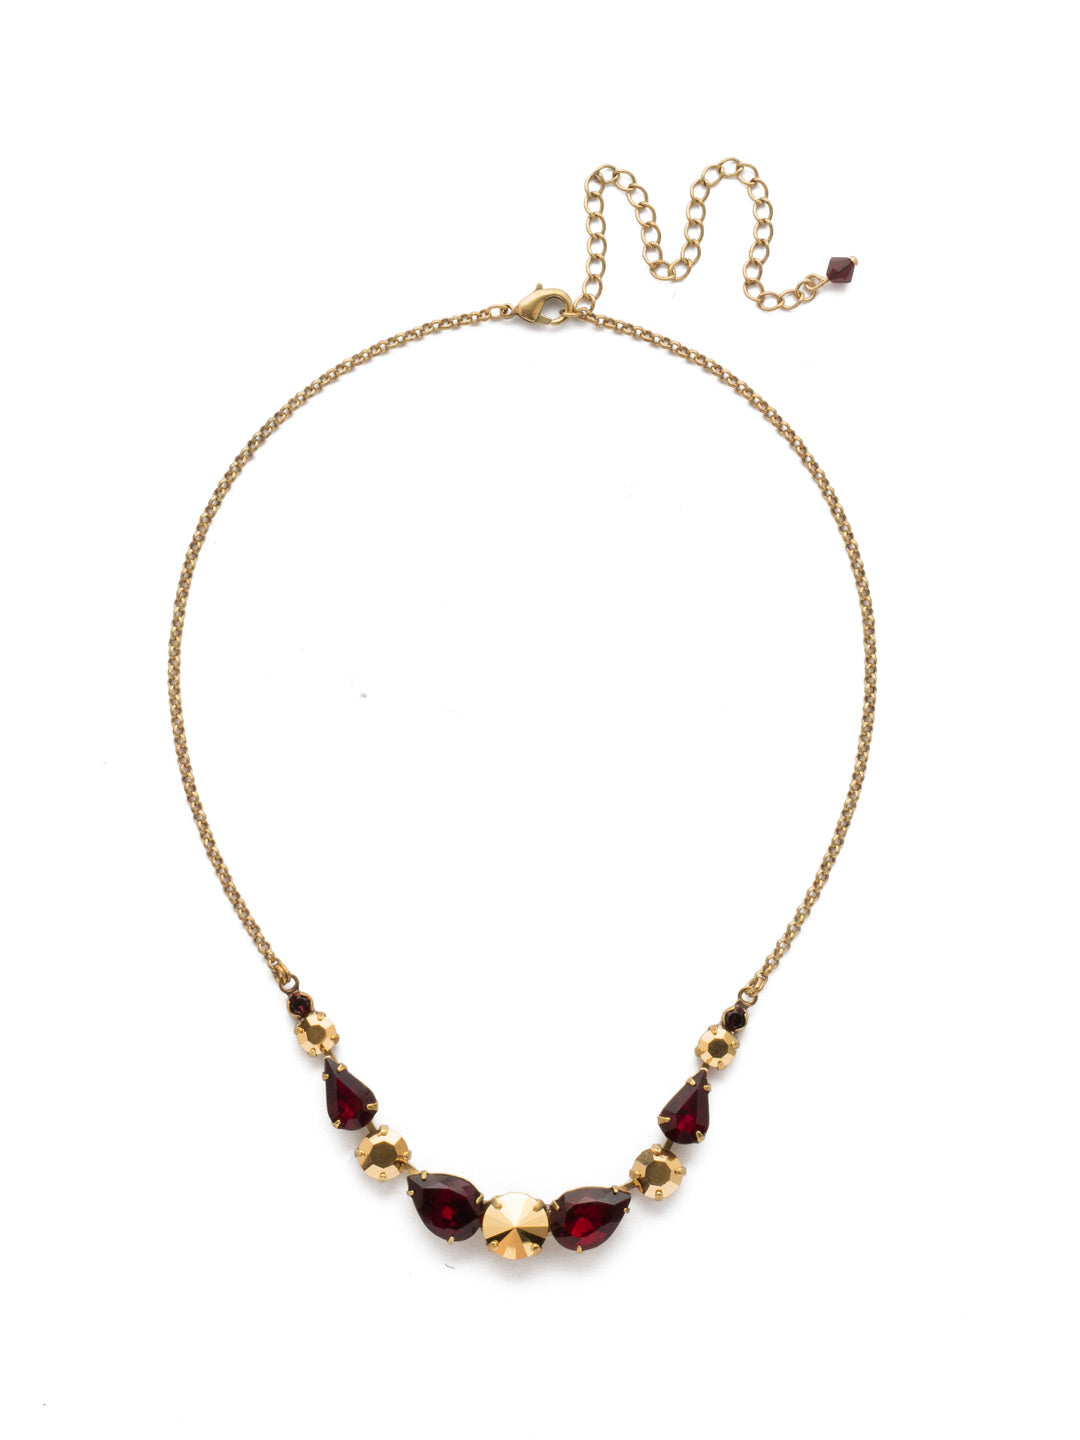 Polished Pear Statement Necklace - NDN74AGMMA